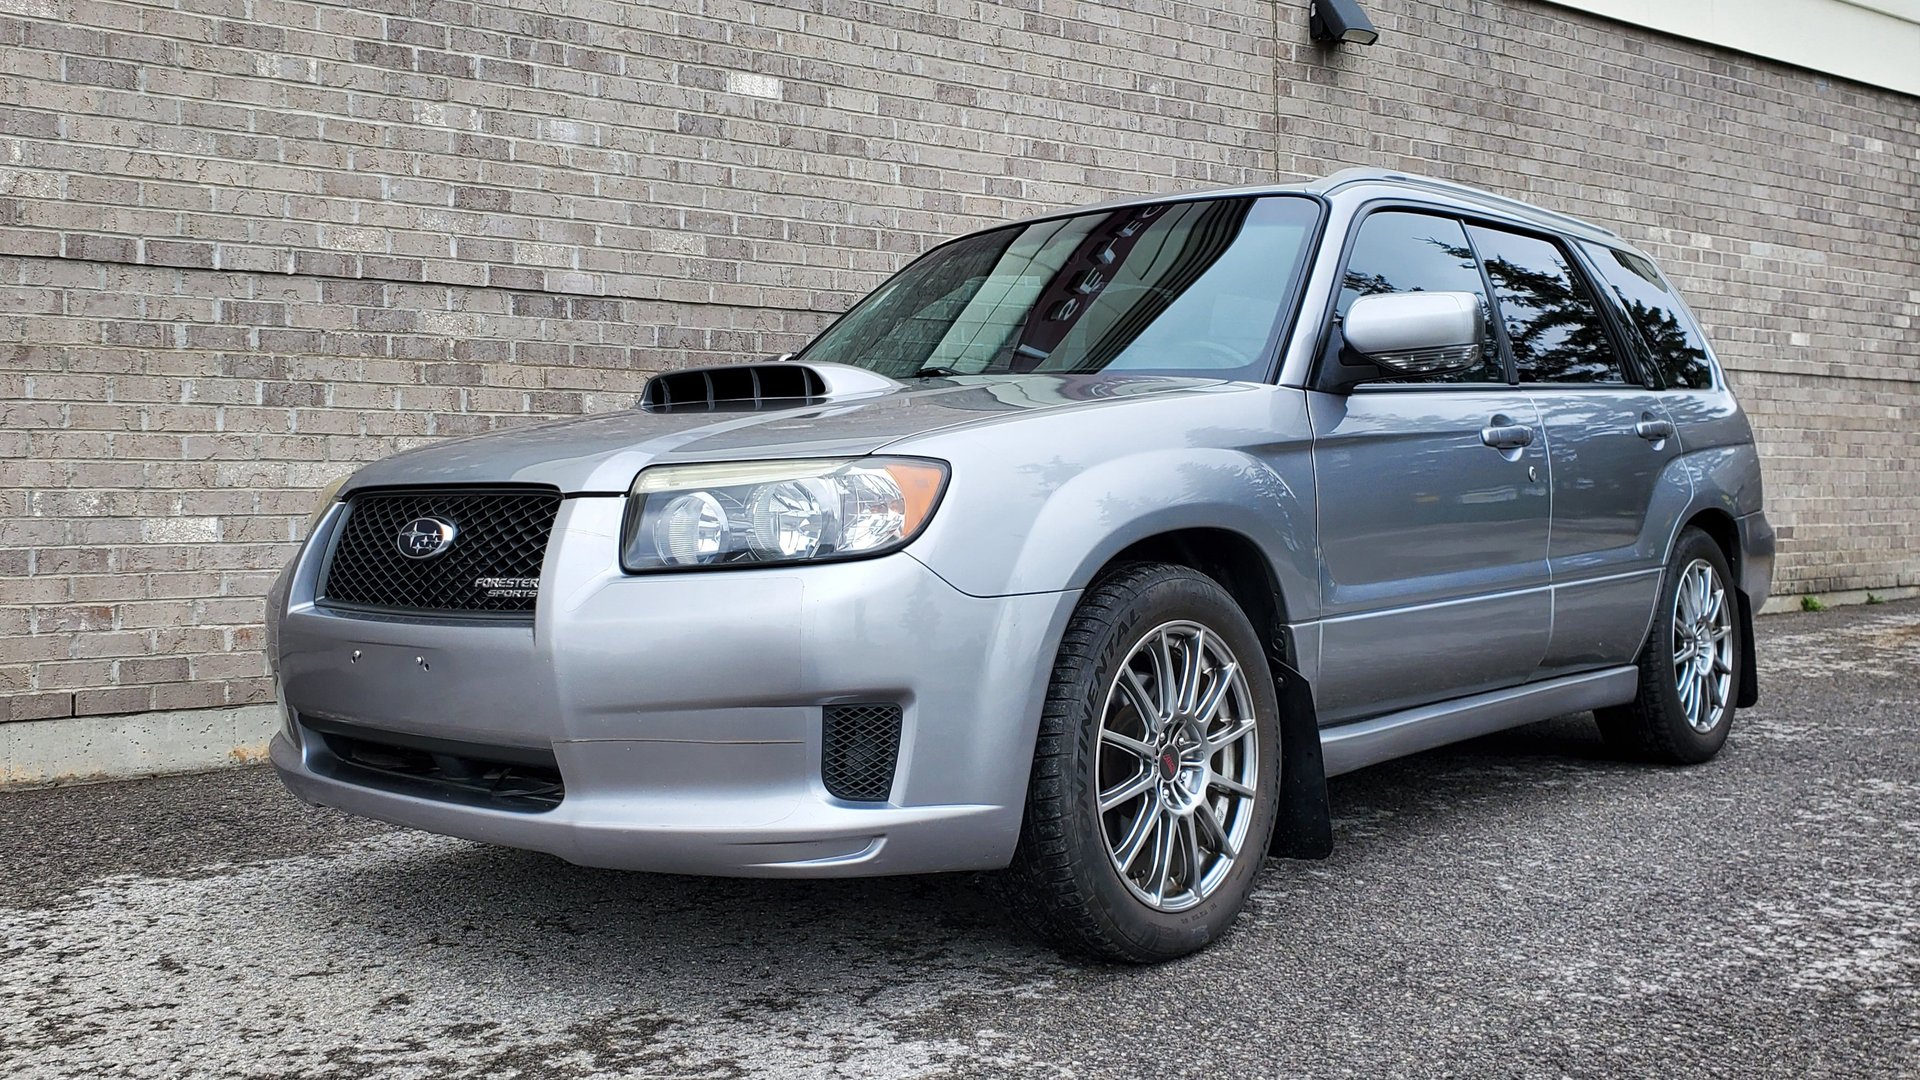 SOLD: - 2008 Forester XT Sports, 5MT, 100k miles, Silver | Subaru Forester  Owners Forum